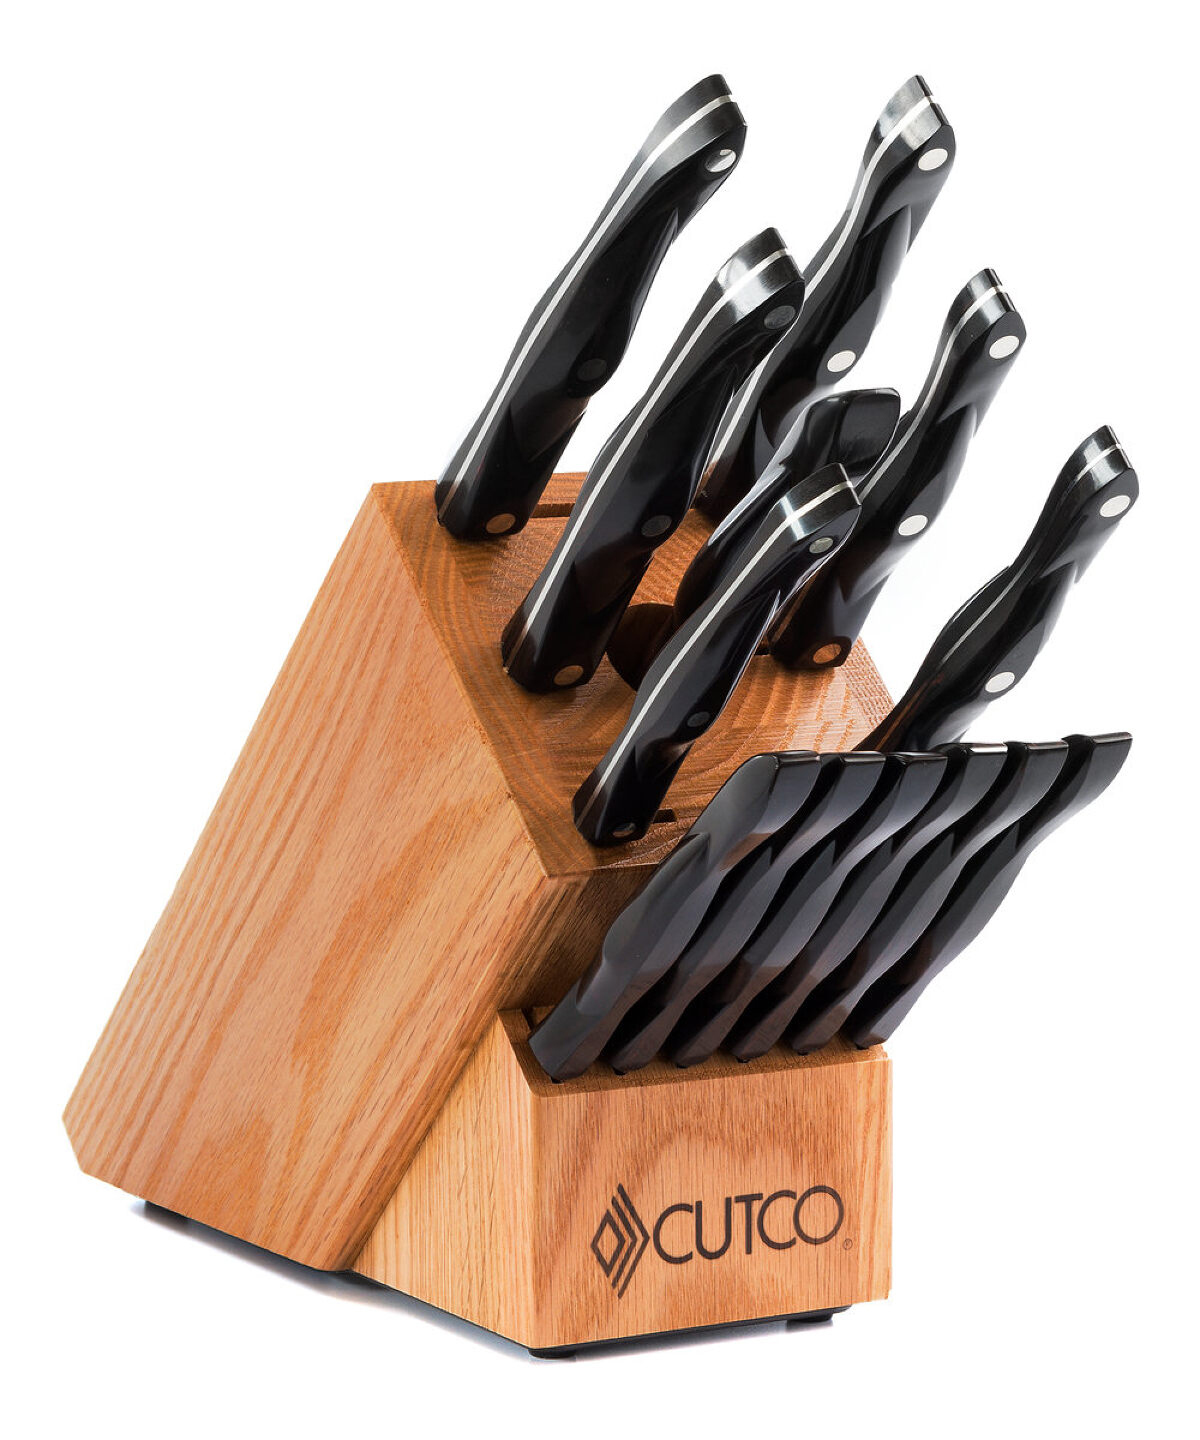 Cutco Galley Set with Block and 6 steak knives